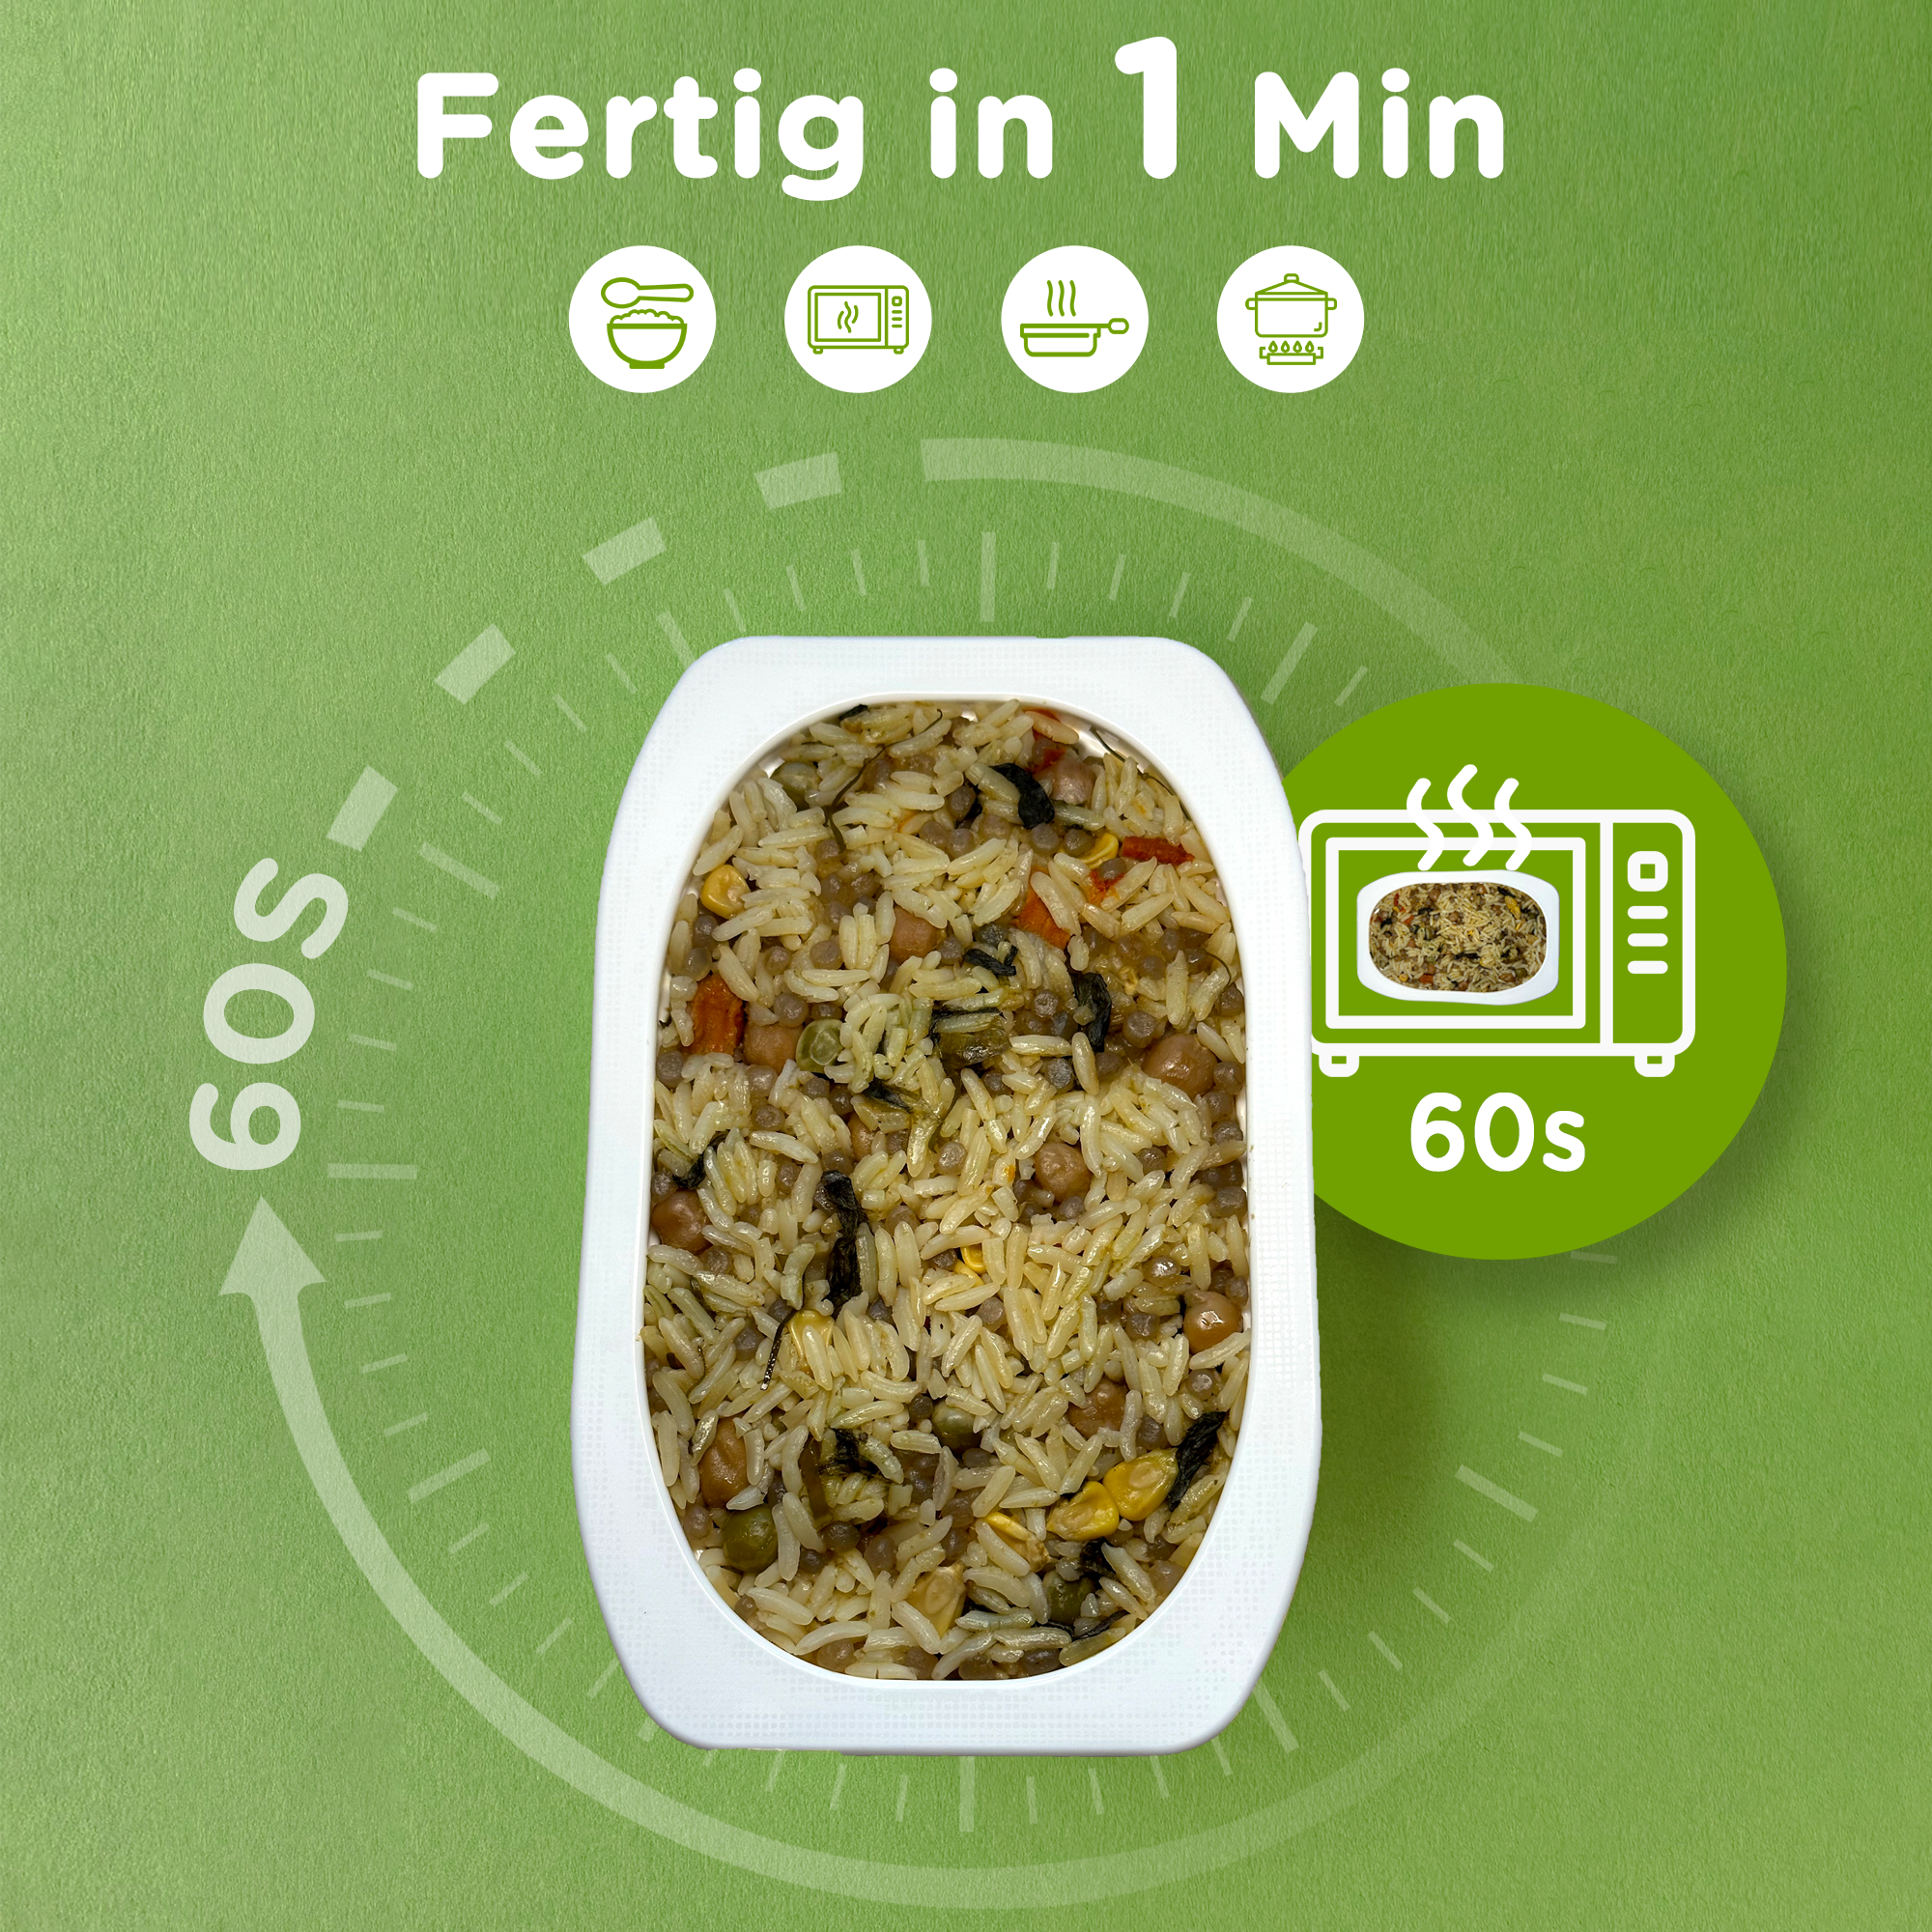 Elf-Family Diet Thai Fried Rice - Spicy green curry from Thailand - Ready meals for microwave in 1 minute - 100% Natural Thai - High in protein / Low in calories / Vegan / Pre-cooked - Box of 6 